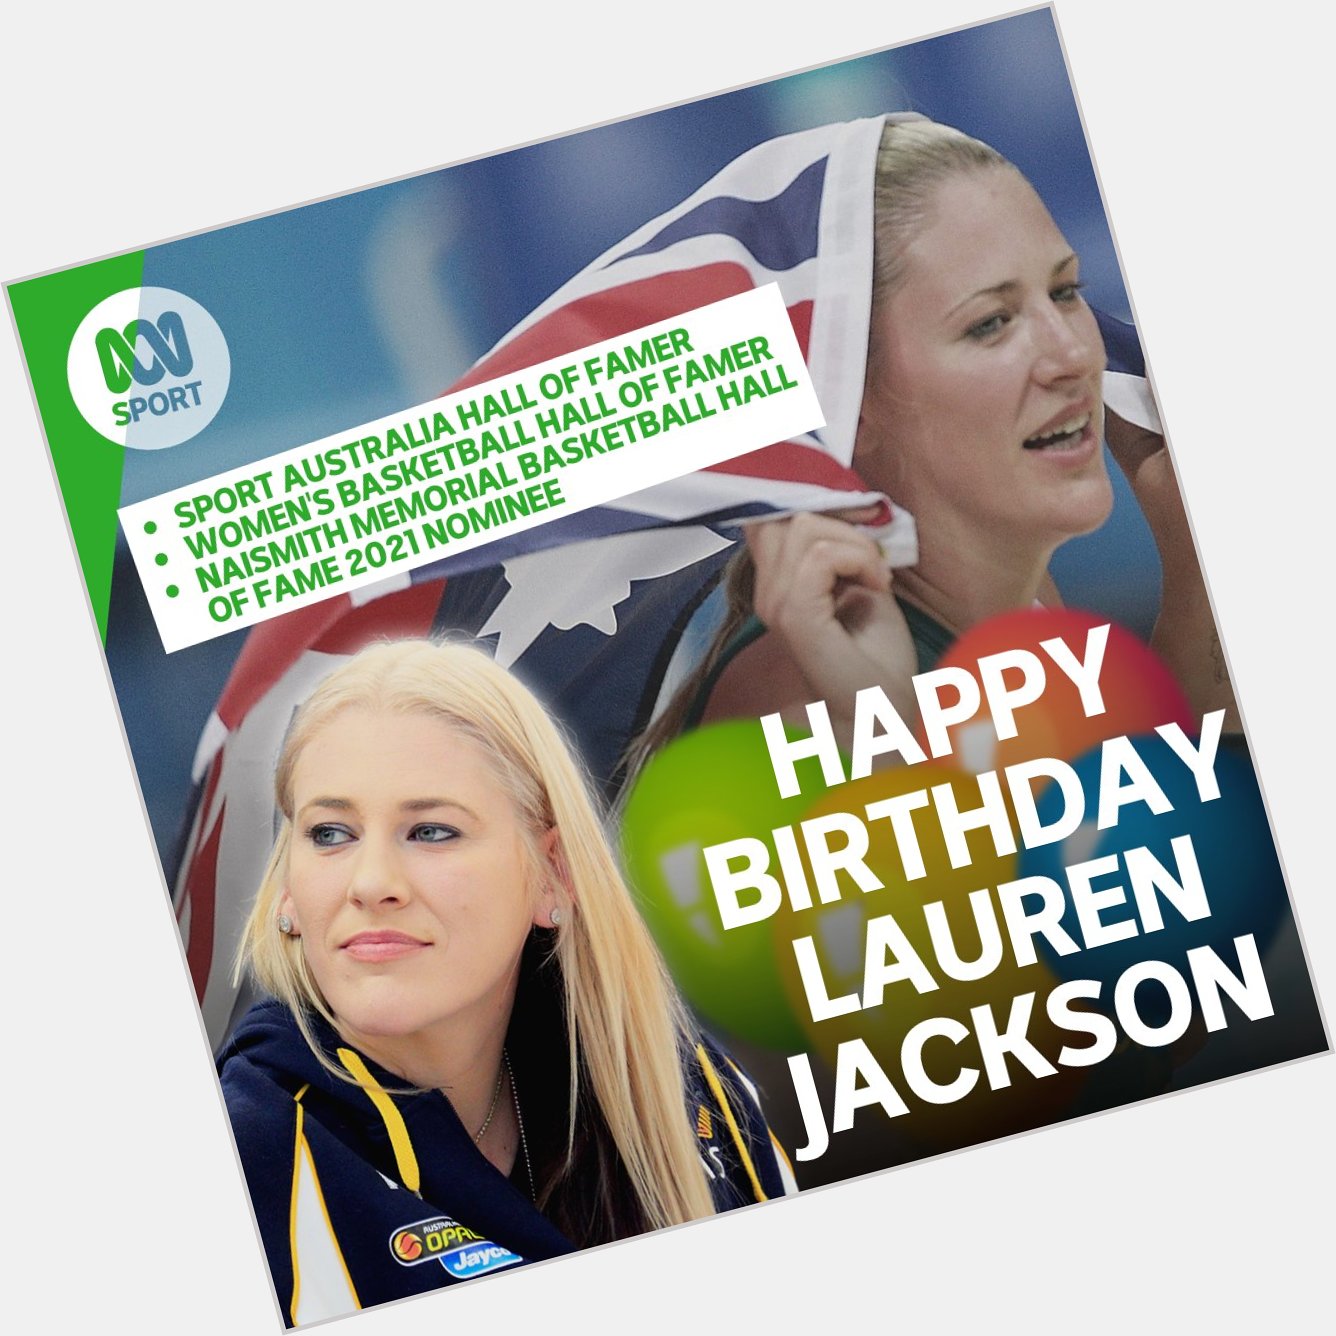 Happy Birthday, Lauren Jackson! Our greatest basketball player, and that\s a fact.  